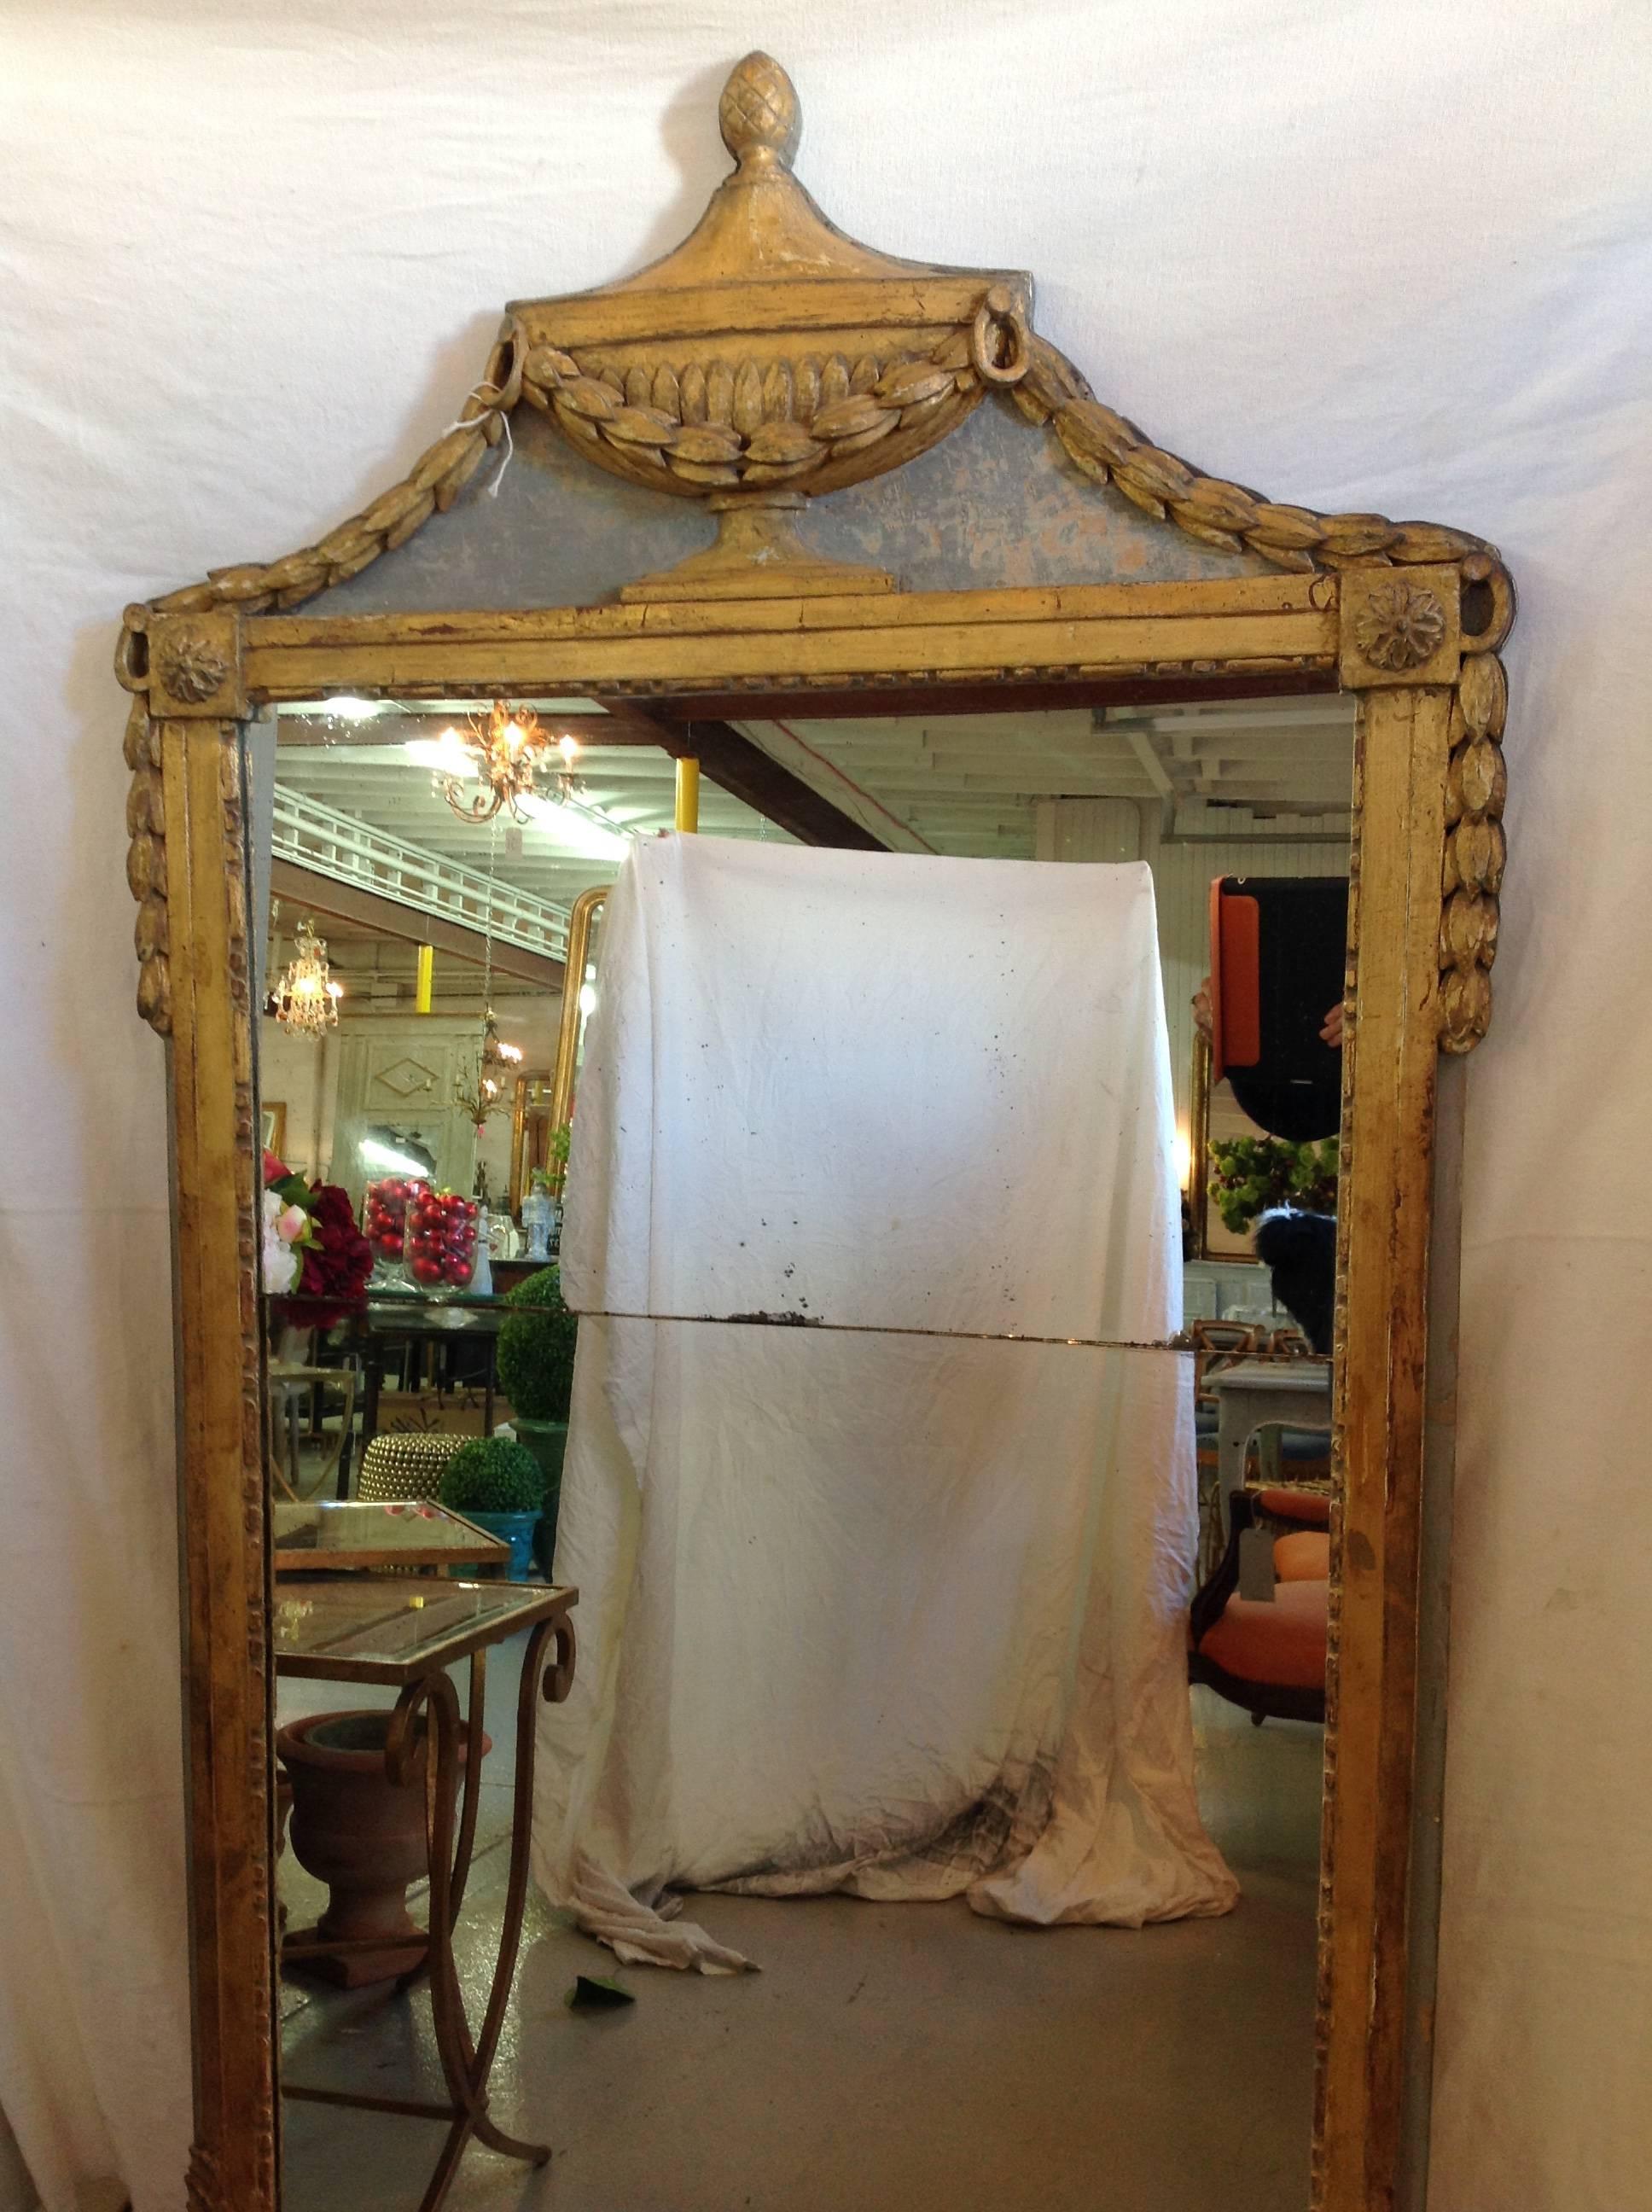 This mirror is exquisite and makes a statement with its fine carving and the wonderful gilt urn. Everything is original and comes from Normandy.